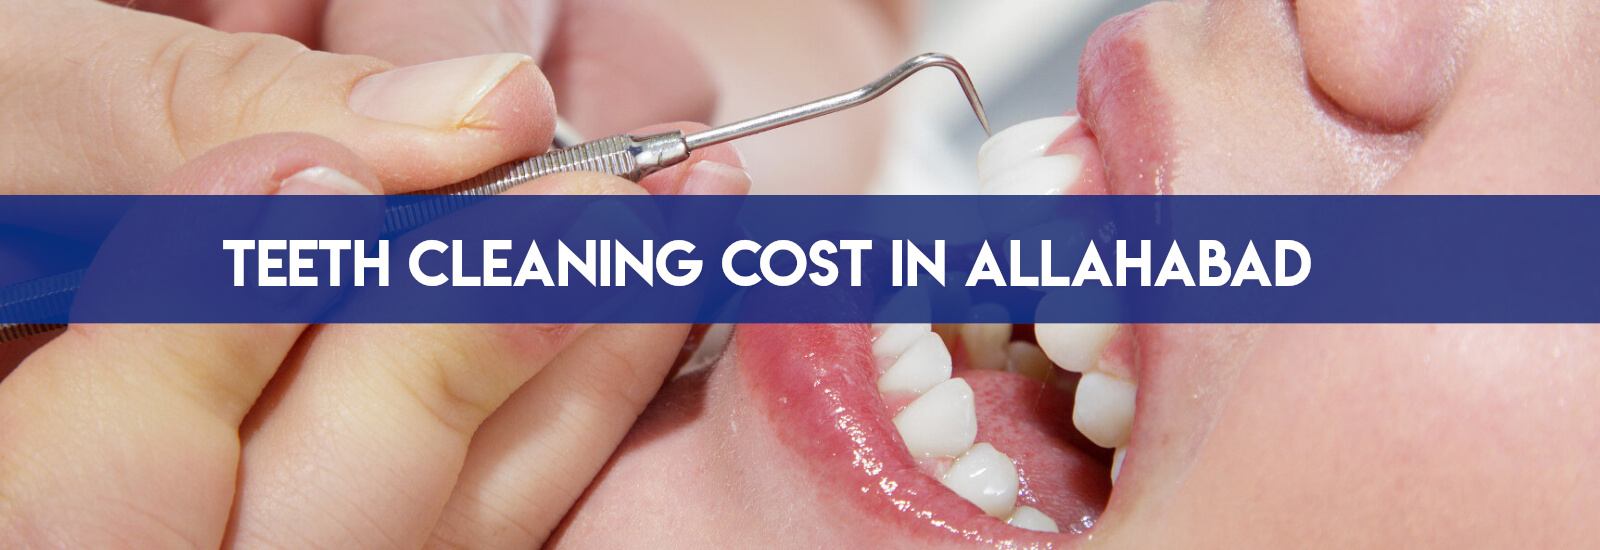 Teeth Cleaning Cost in Allahabad